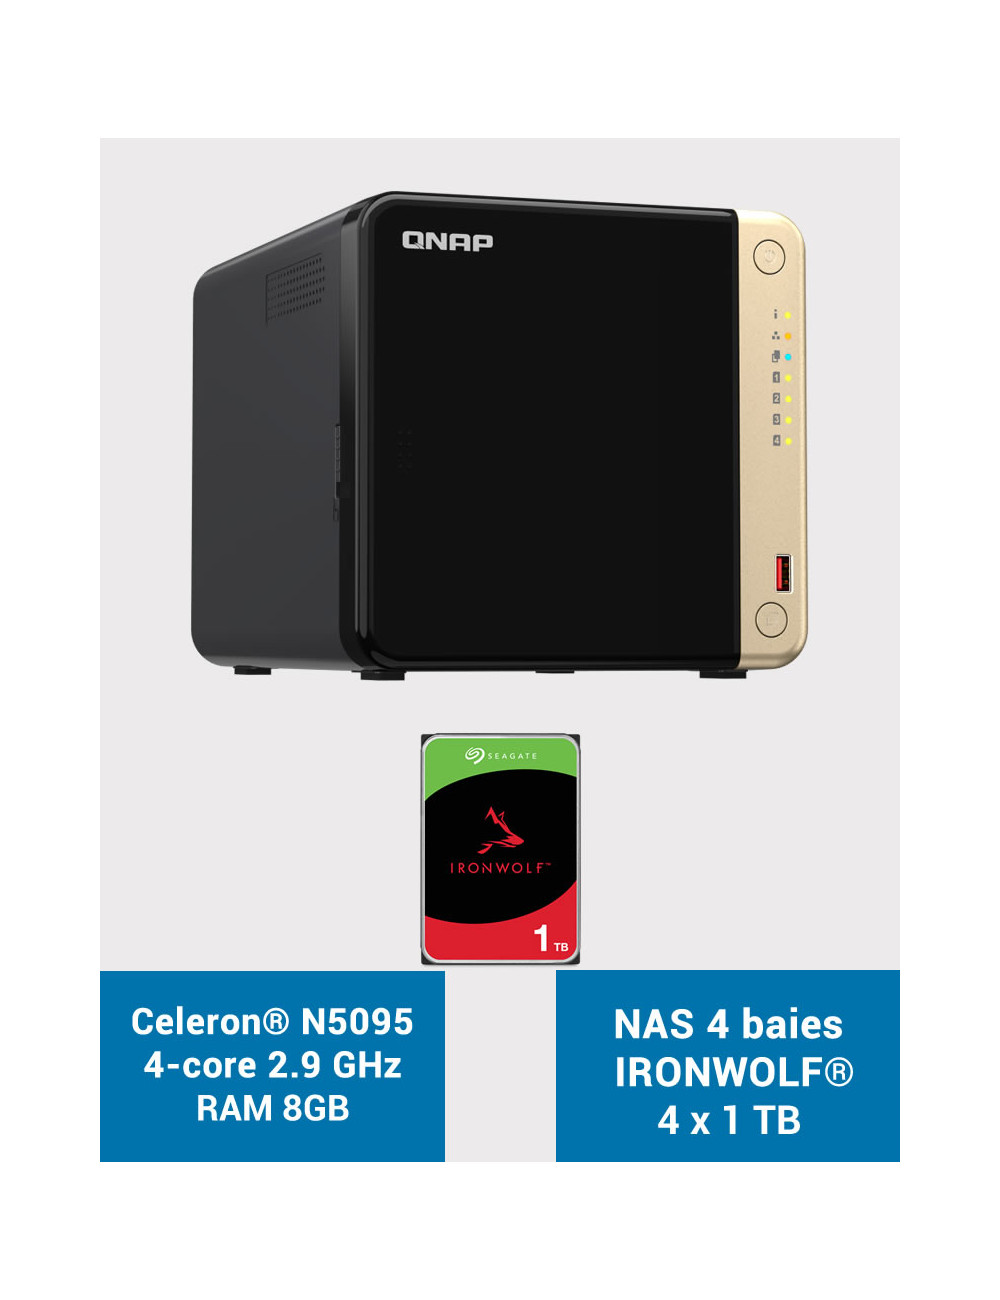 QNAP TS-464 8GB Serveur NAS 4 baies IRONWOLF 4To (4x1To)